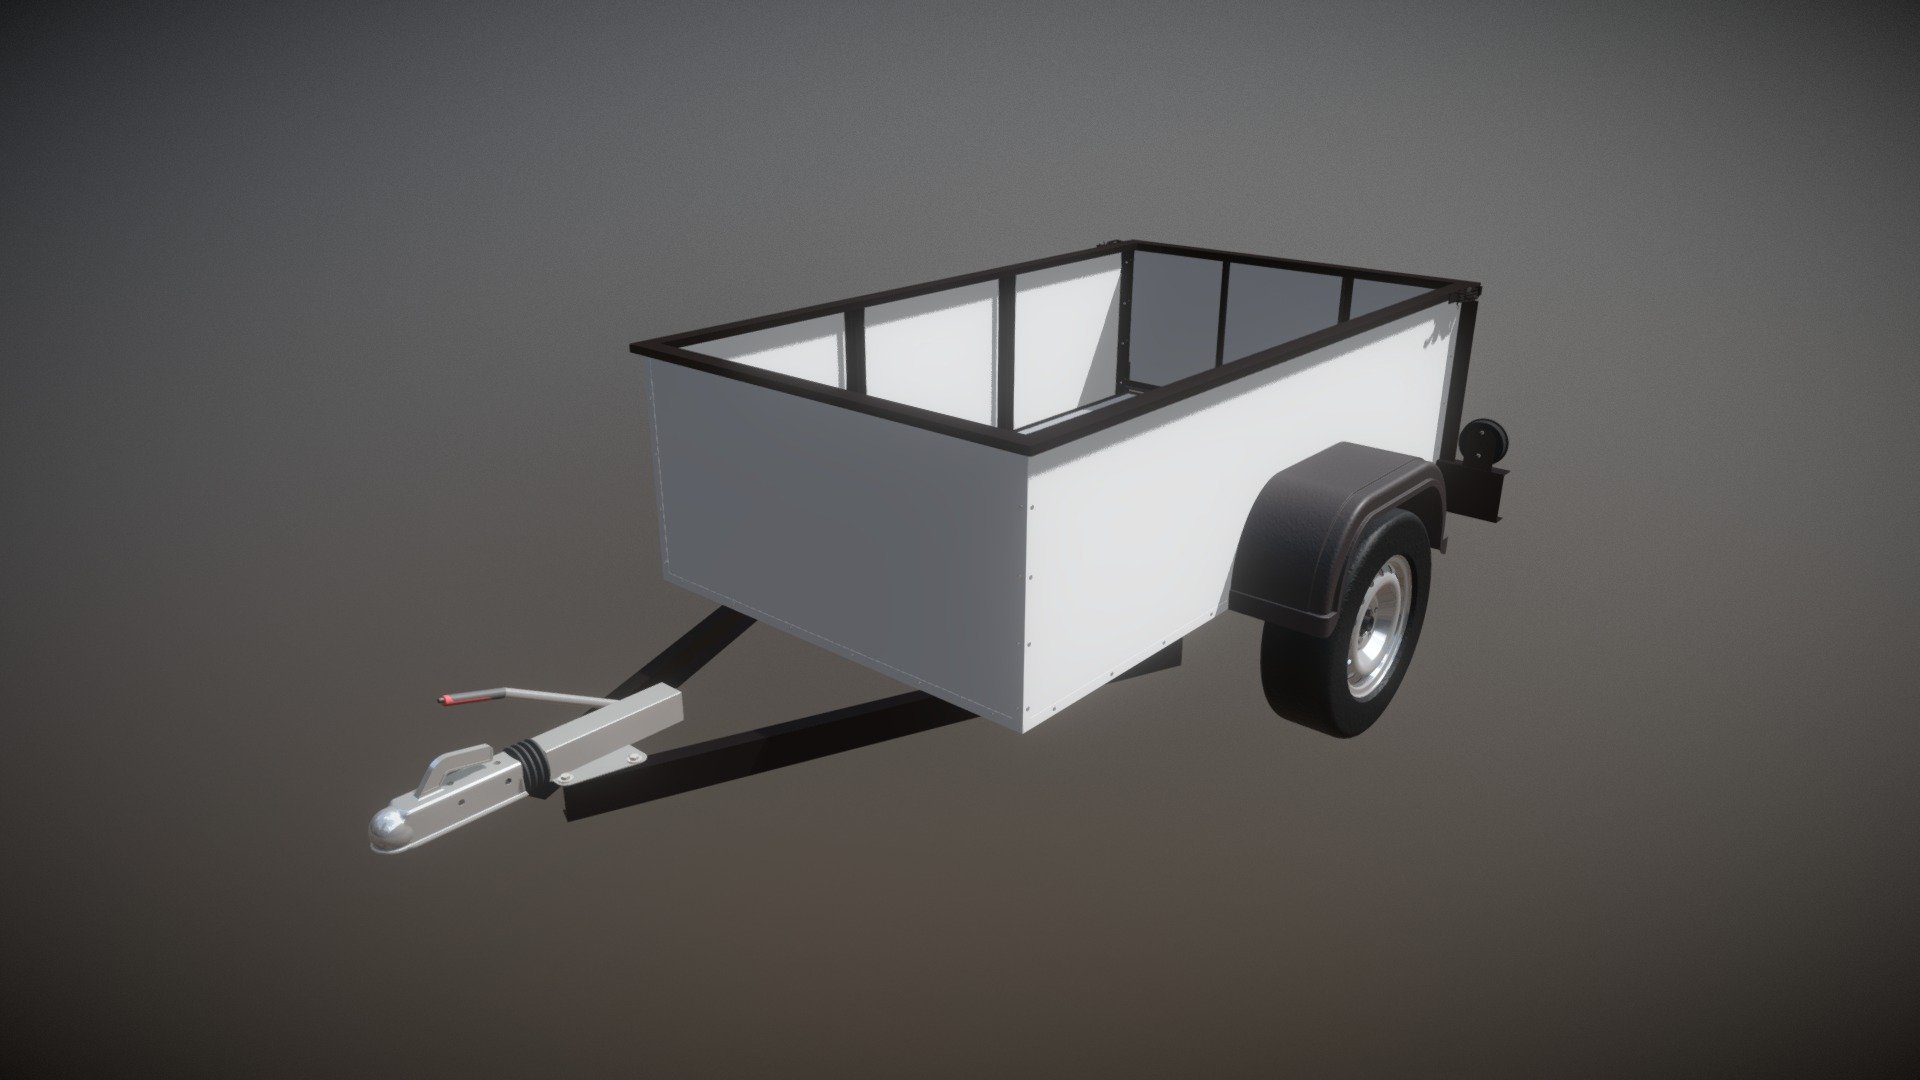 This is a custom Tow Truck Trailer which was designed for a client.
It was modeled on SolidWorks and exported to SolidWorks Visualize 3d model